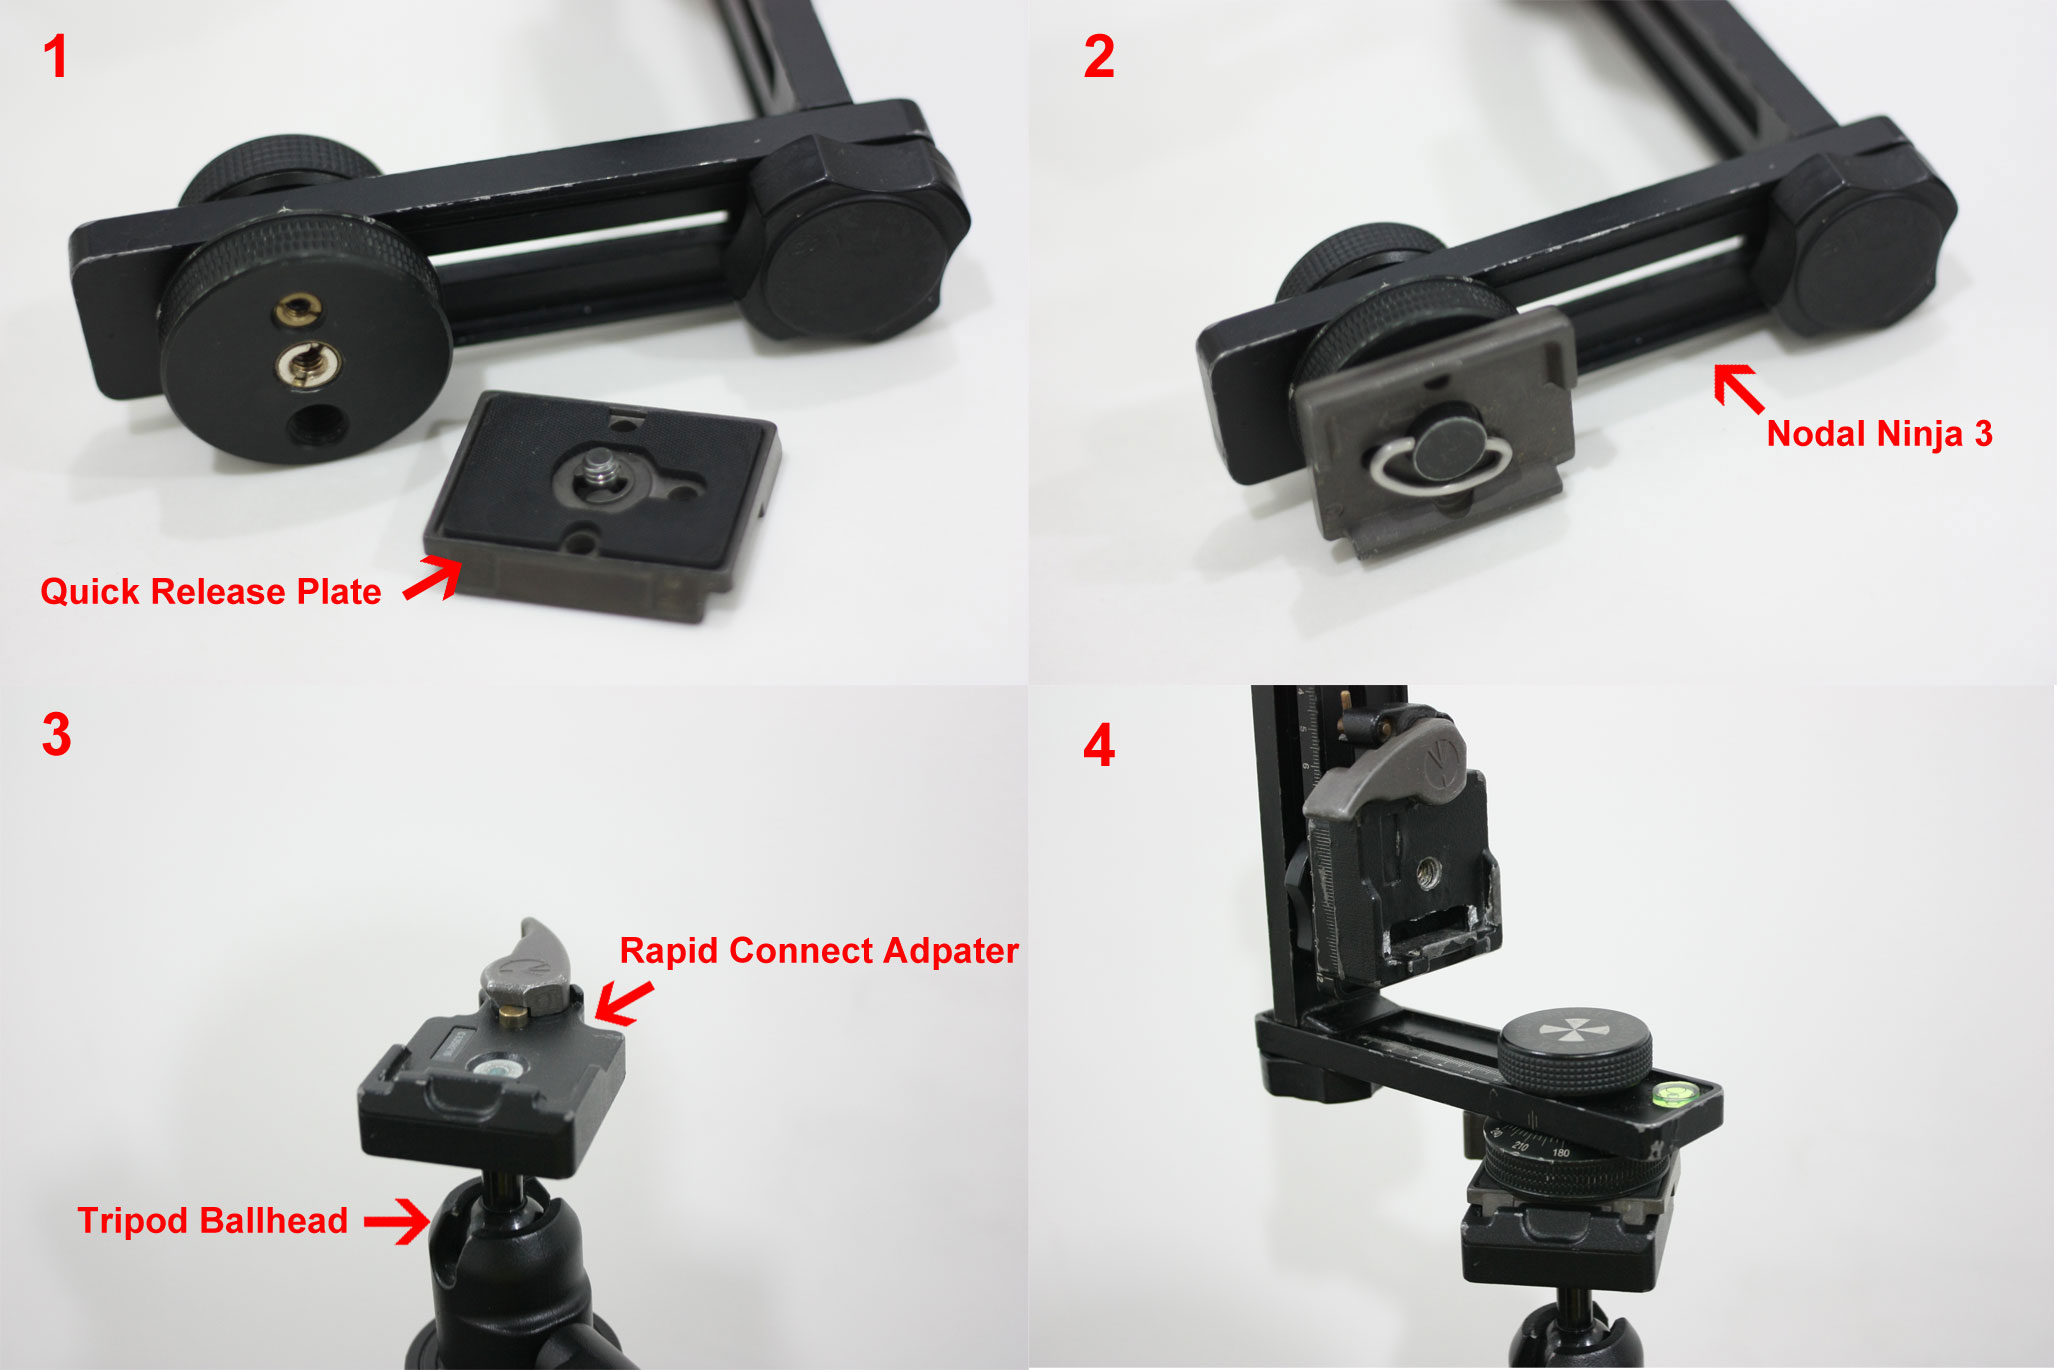 Manfrotto Rapid Connect Adapter and Nodal Ninja 3